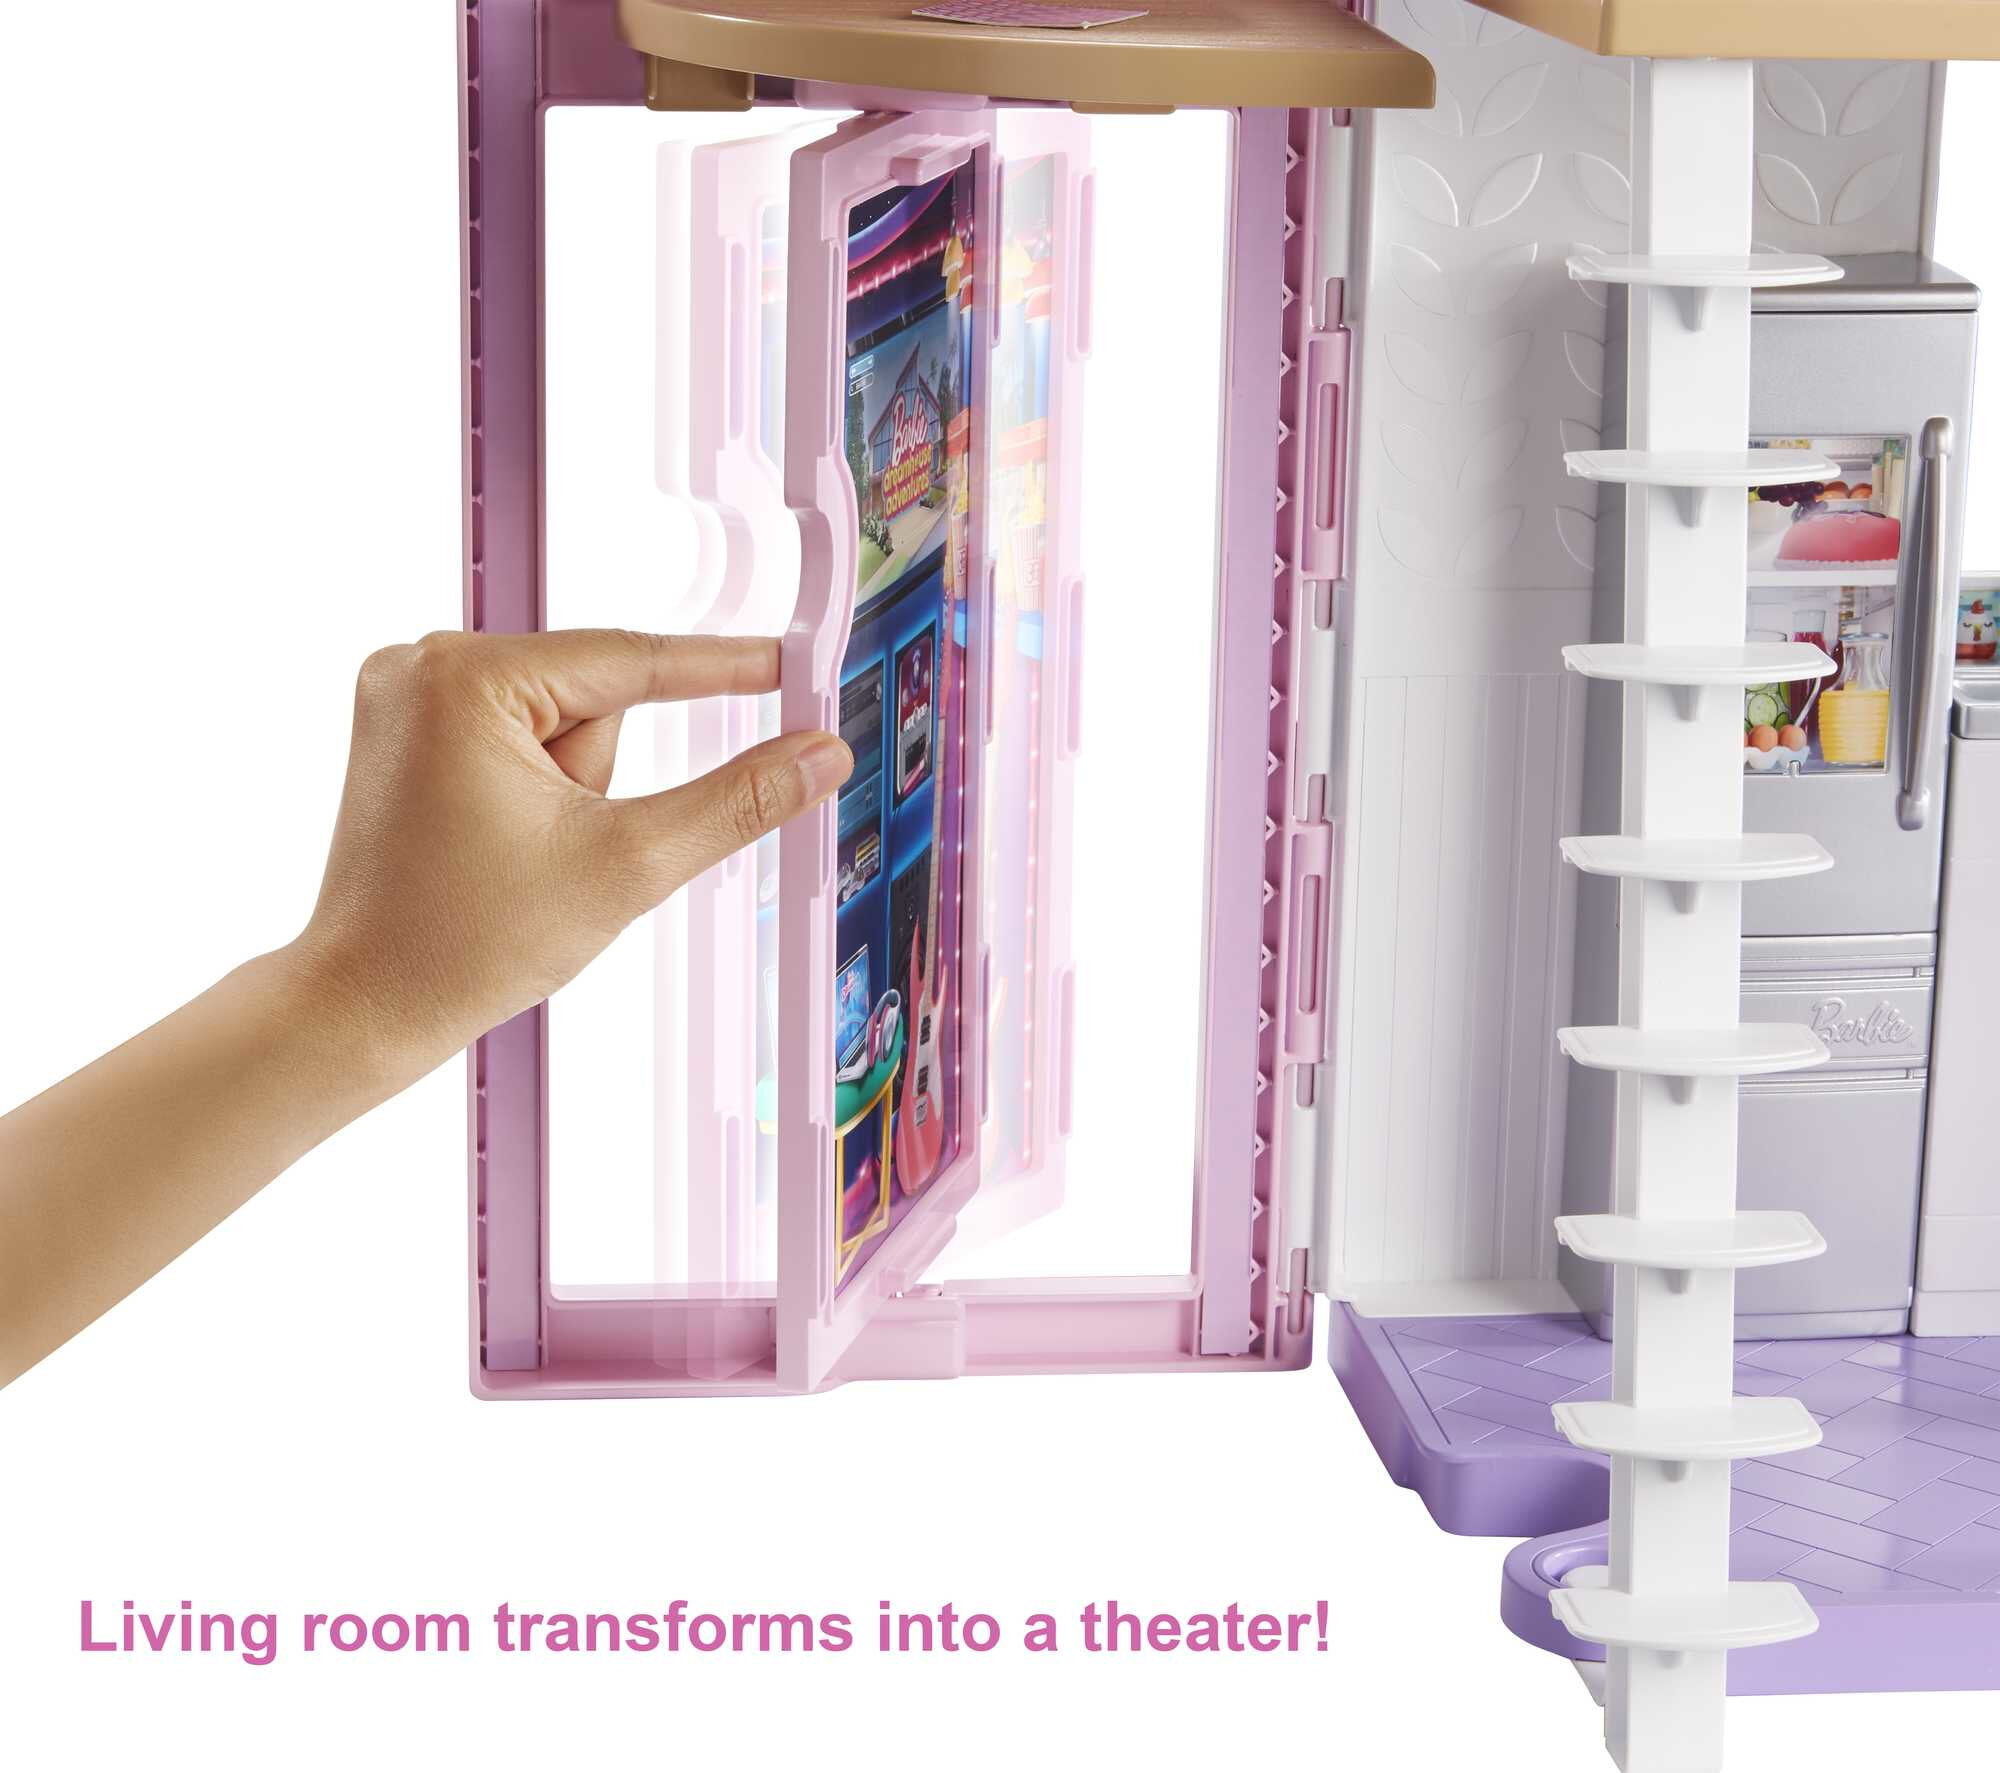 Barbie Malibu House Dollhouse Playset with 25+ Furniture and Accessories (6 Rooms) - image 5 of 8